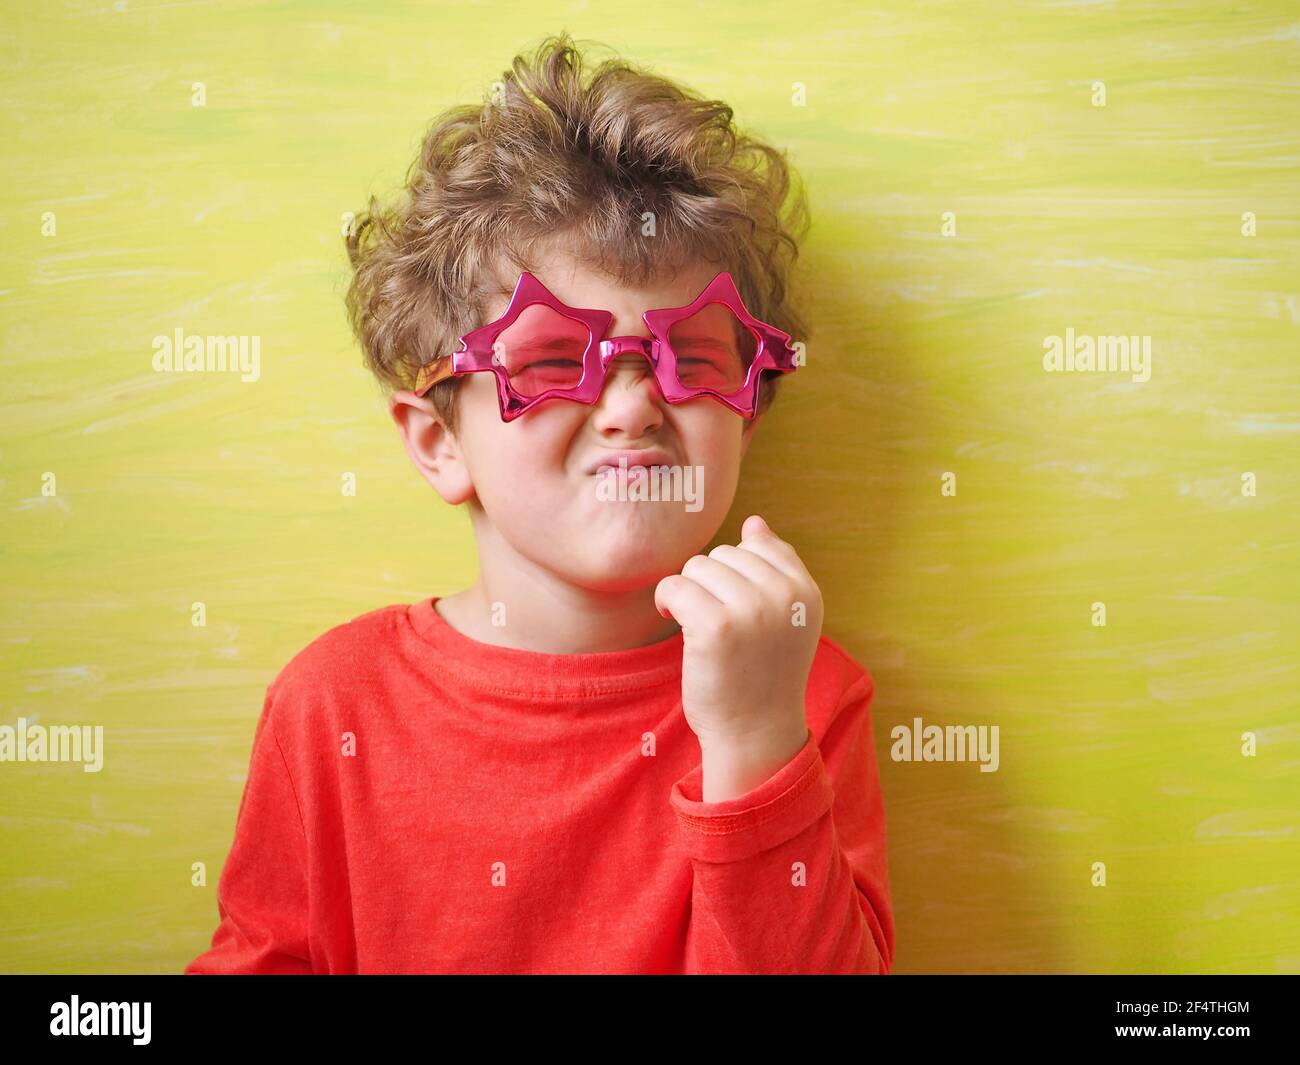 Fun kid in eyeglasses in shape of star makes funny face. Yellow background. Stock Photo